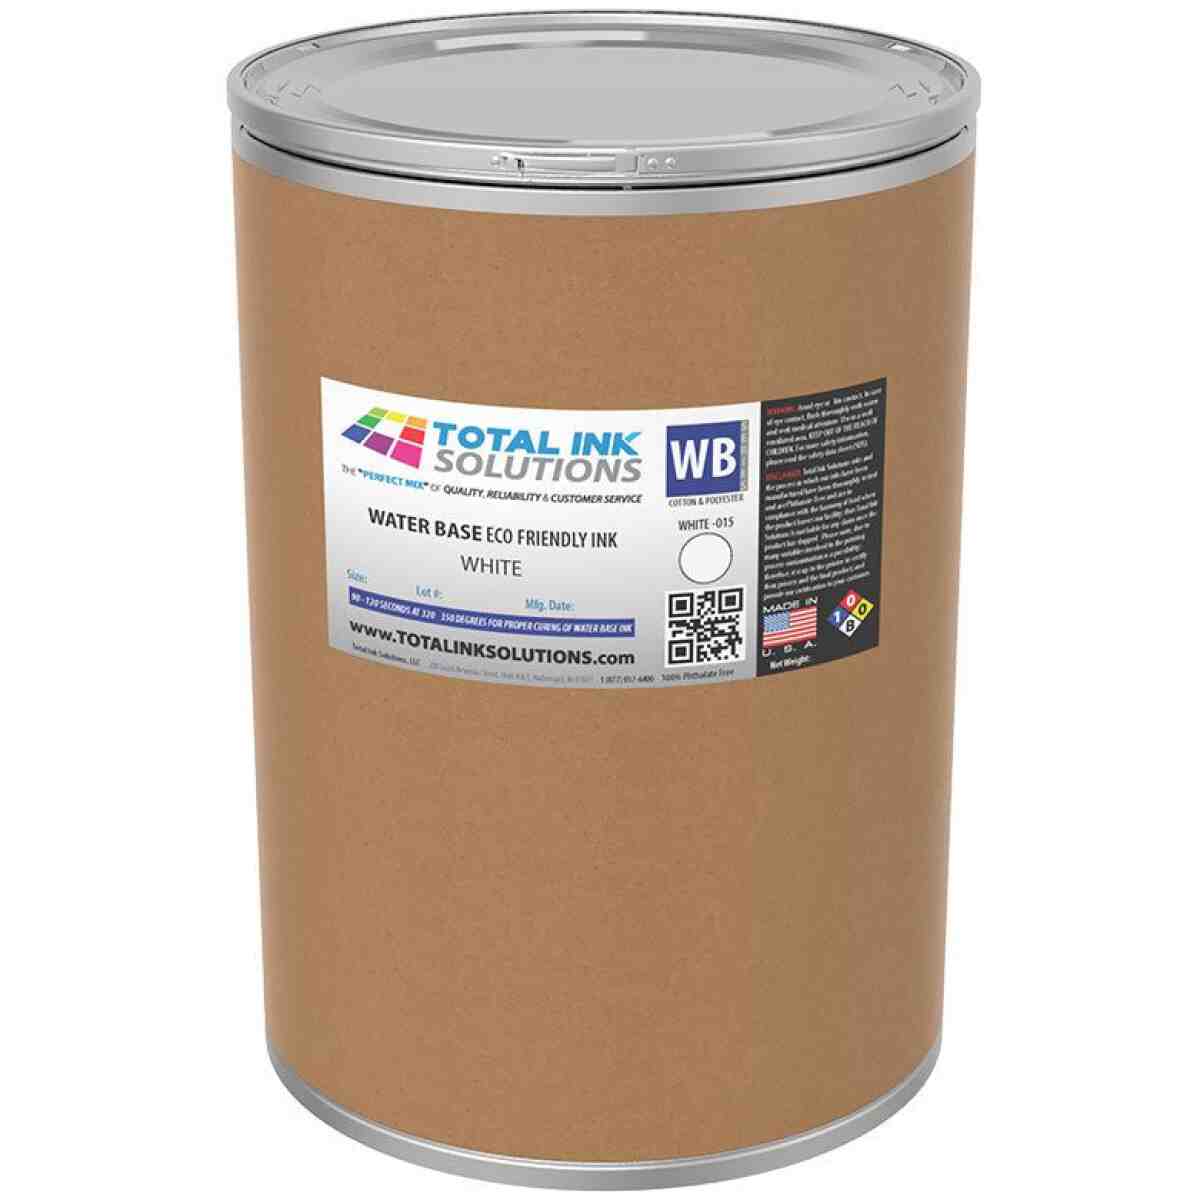 WATERBASE TEXTILE INK - WHITE - 30 GALLONS